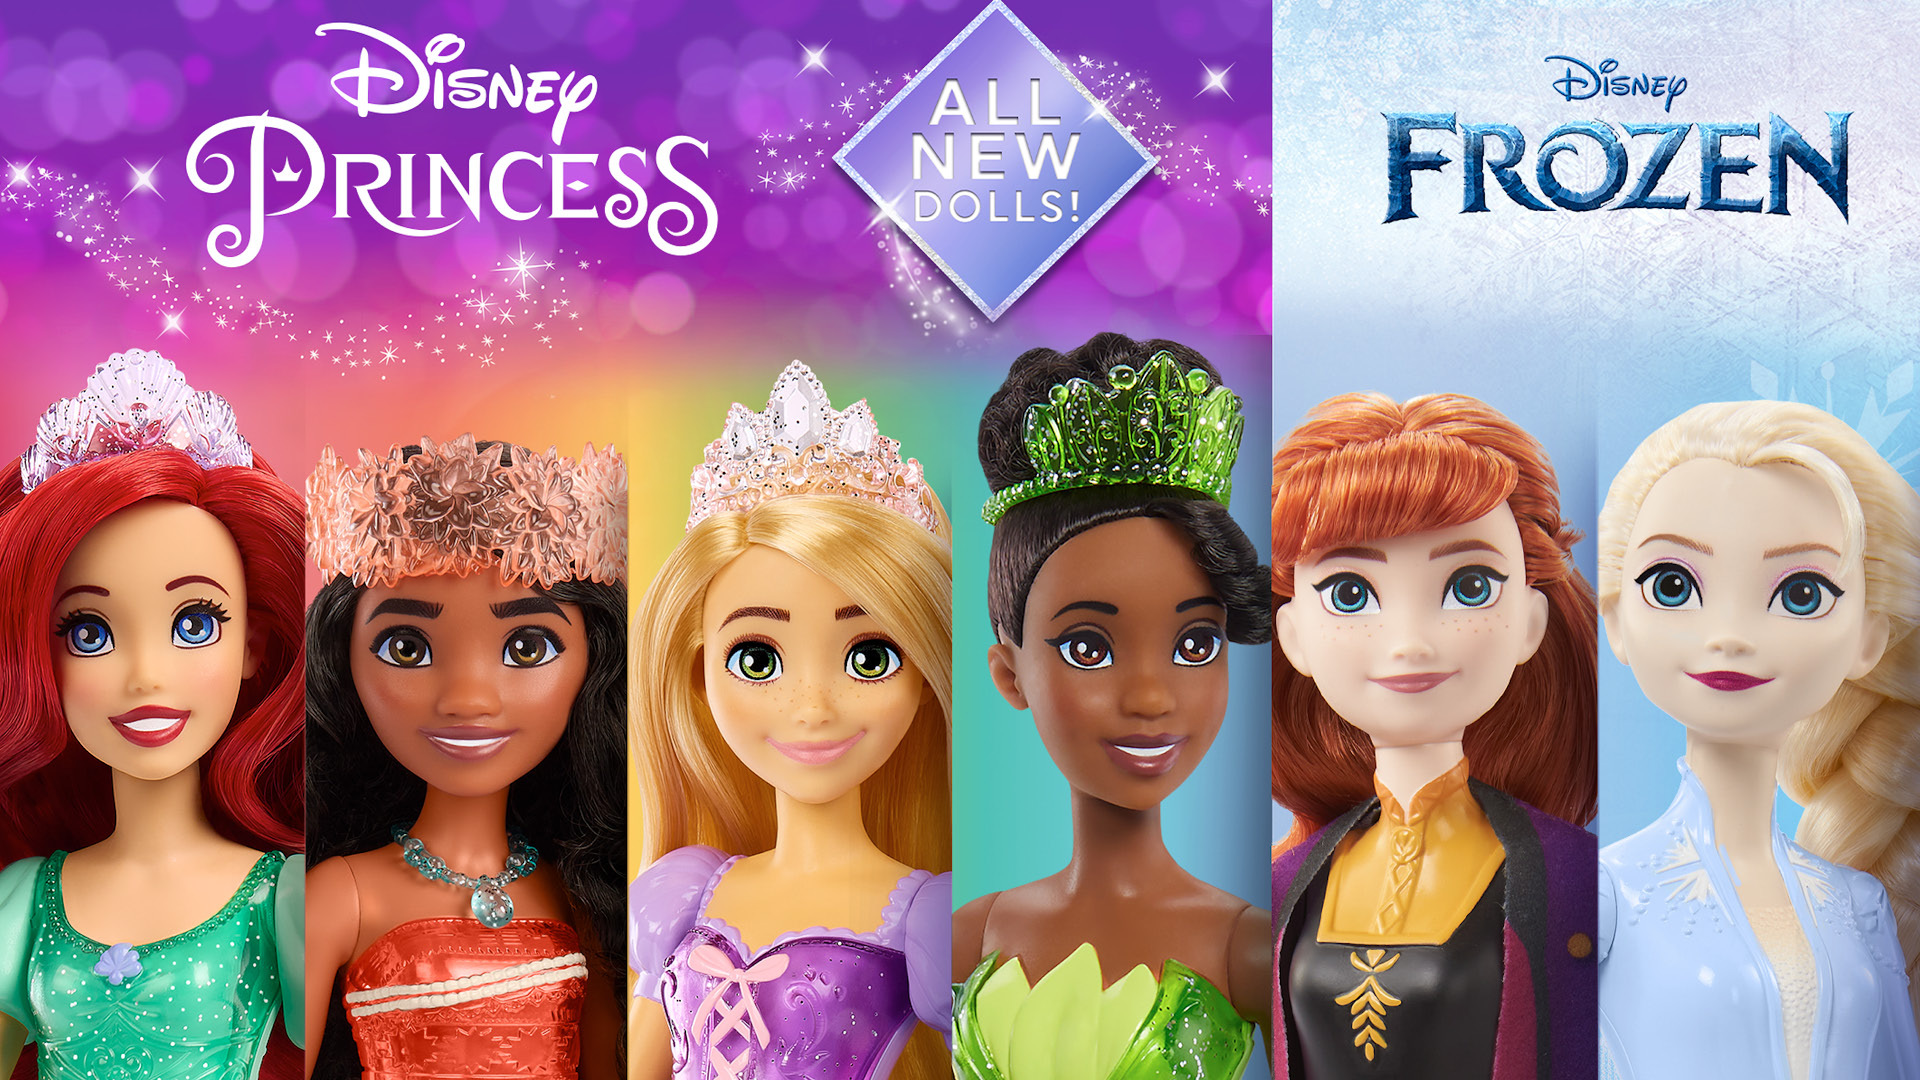 Mattel and Disney Launch New Princess and 'Frozen' Dolls | License